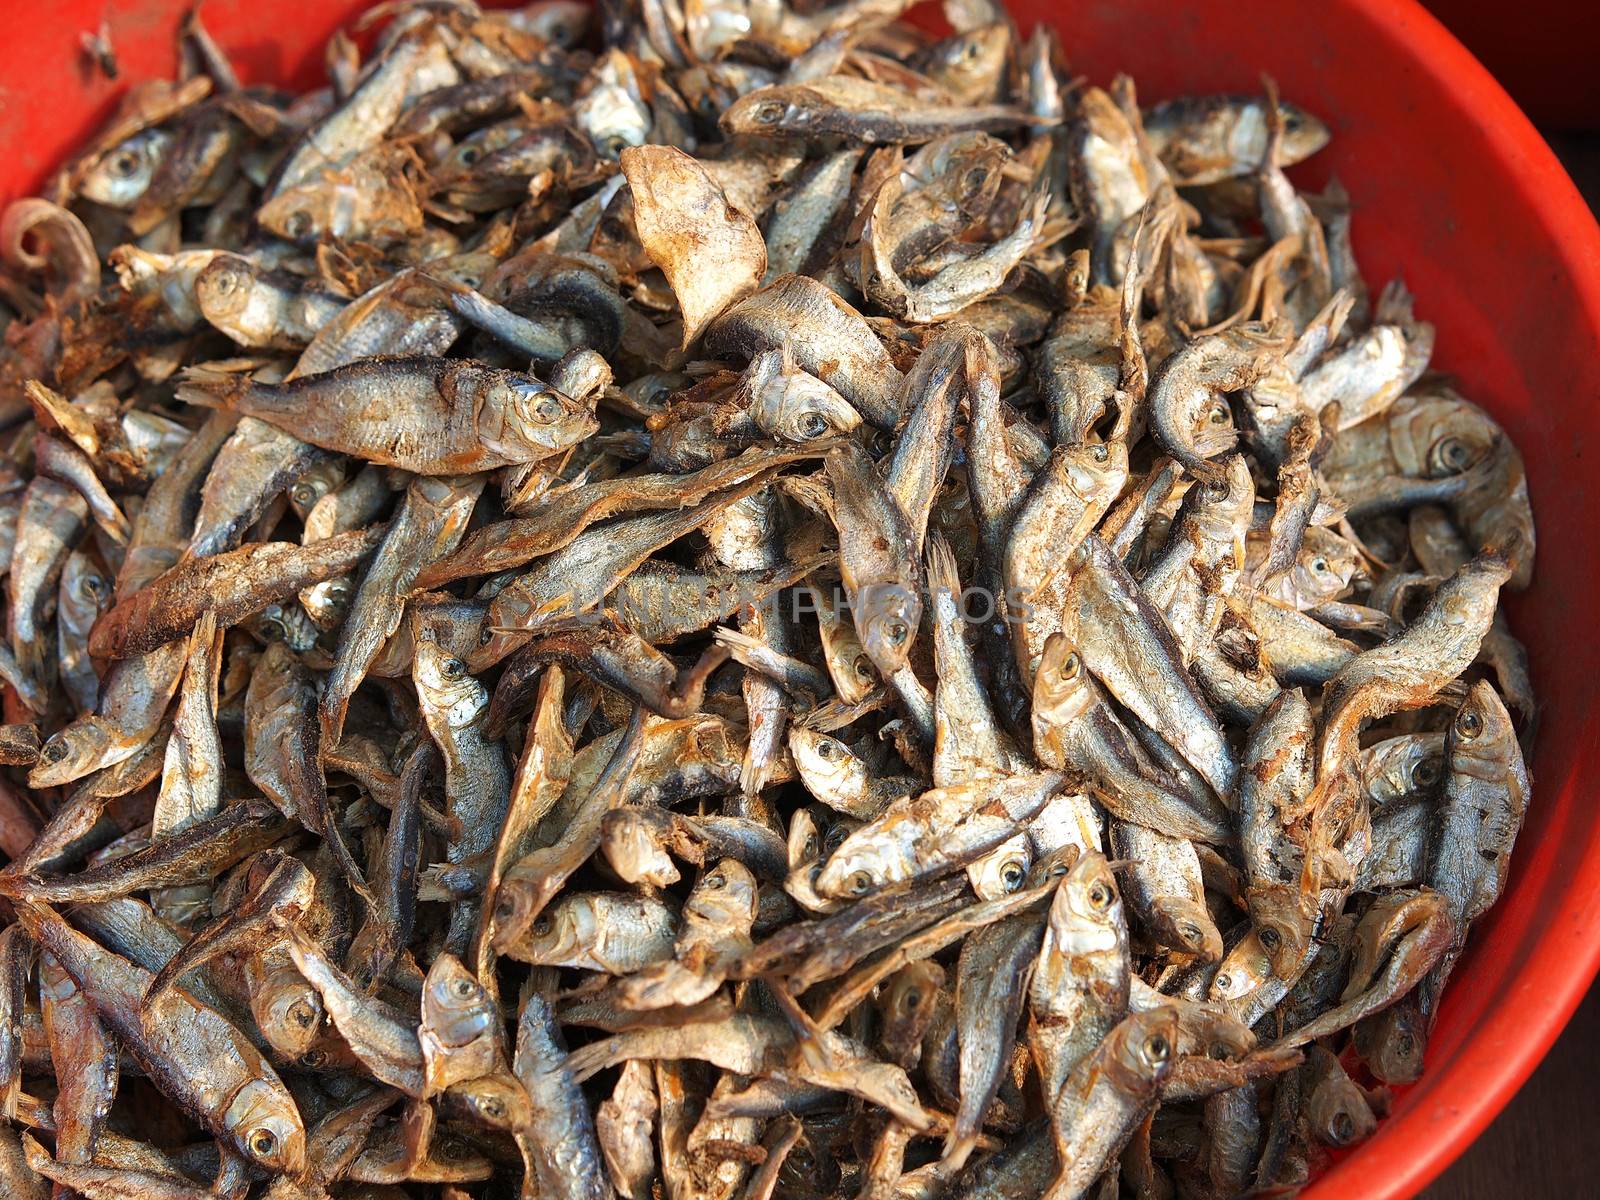 dry tinny fish on the open matket in Asia       